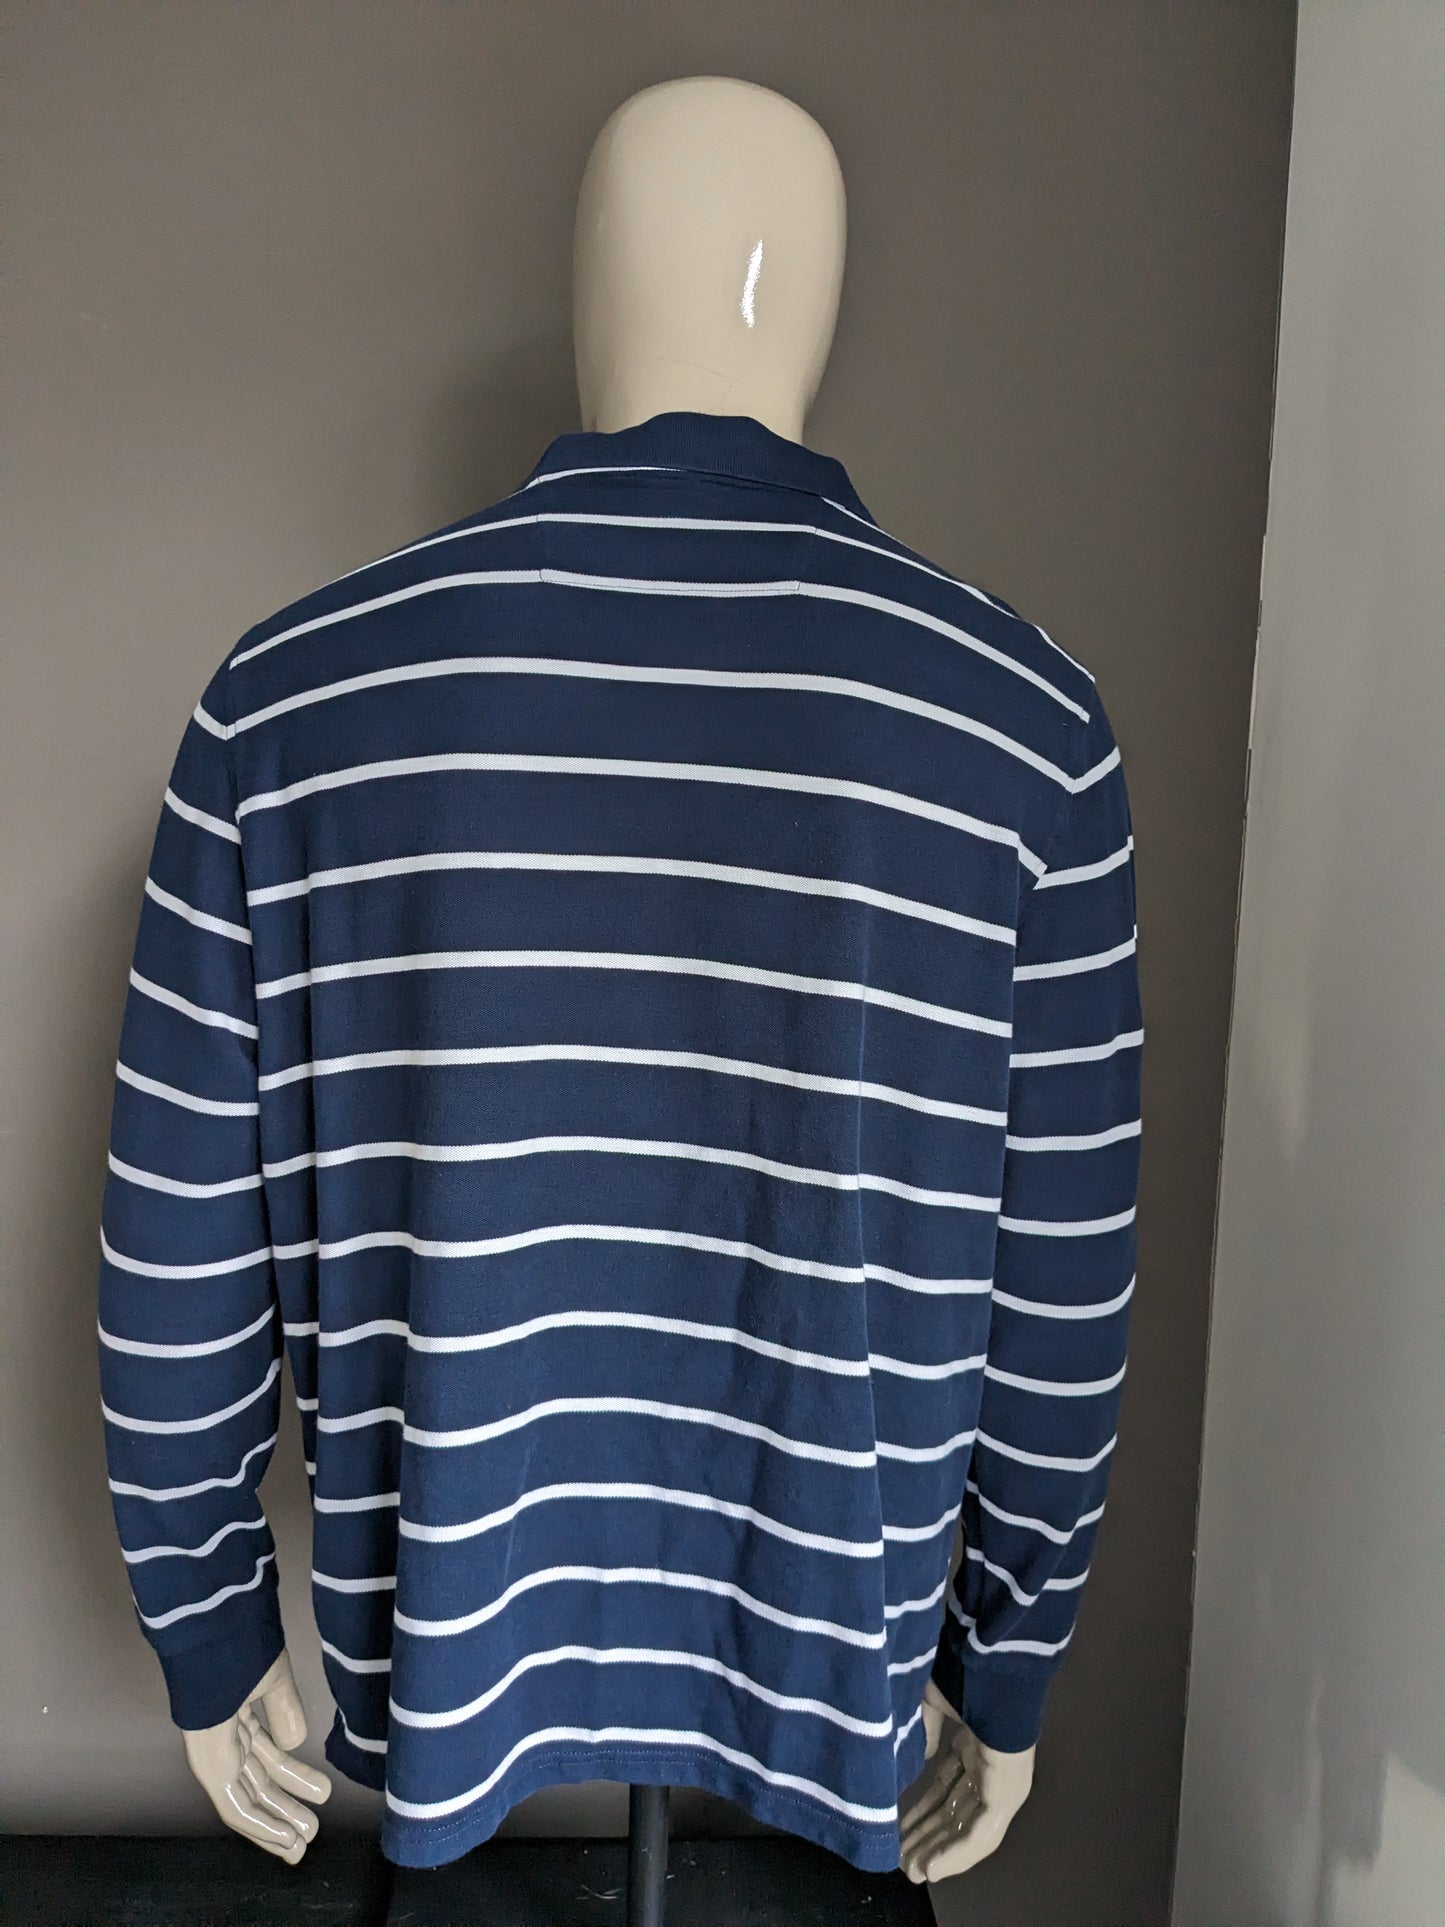 M&S Collection Polotrui. Blue white striped. Size 2XL / XXL. Regular fit.